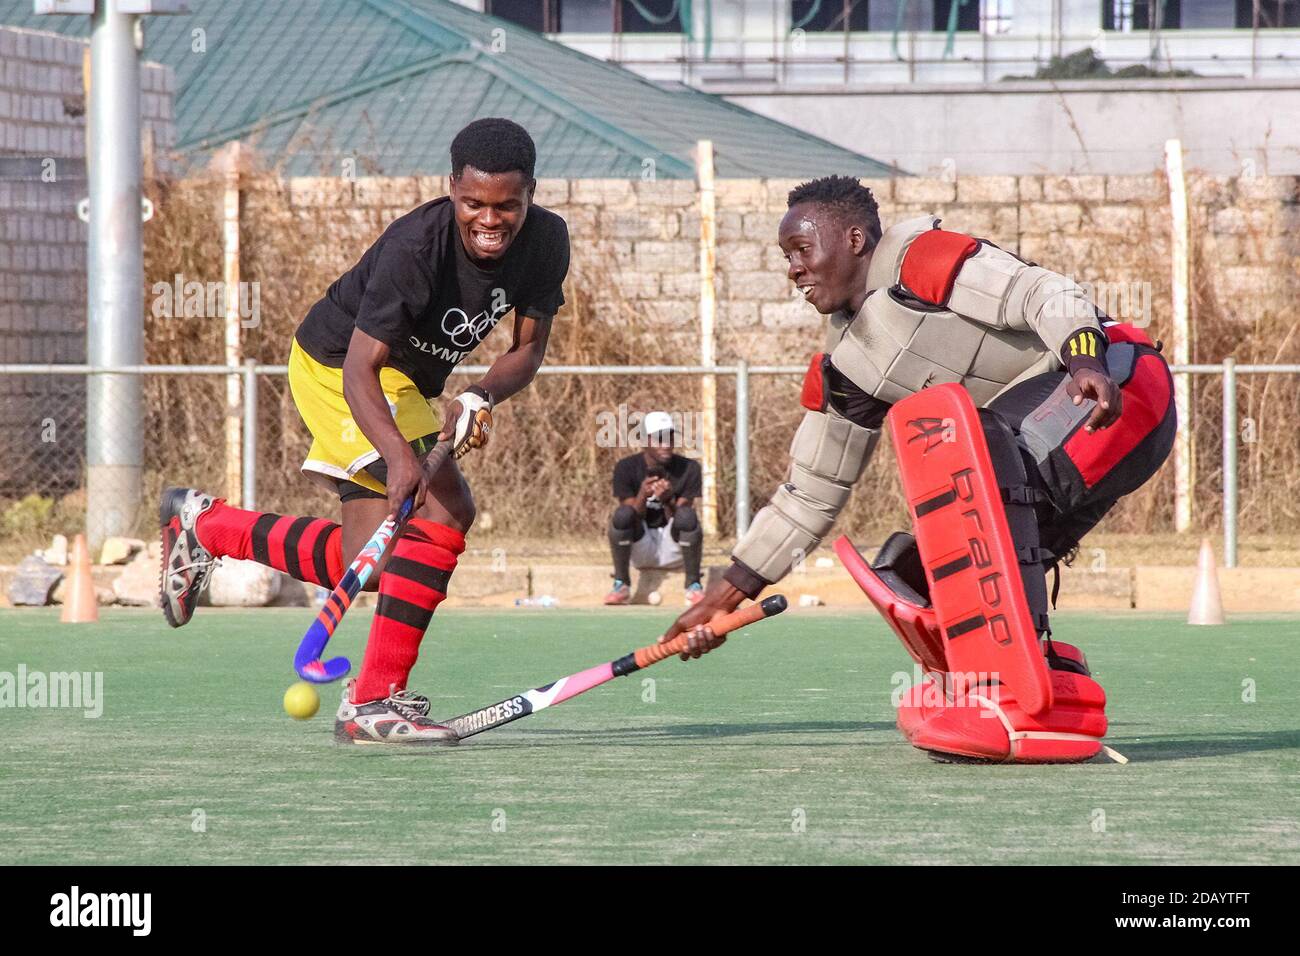 Samson Tembo (left) dribbles the ball around goalkeeper Richard Lungu, who attempts to defend the goal during a practice hockey match at the Olympic Youth Development Centre, a sports venue for young people in Lusaka, Zambia. Stock Photo